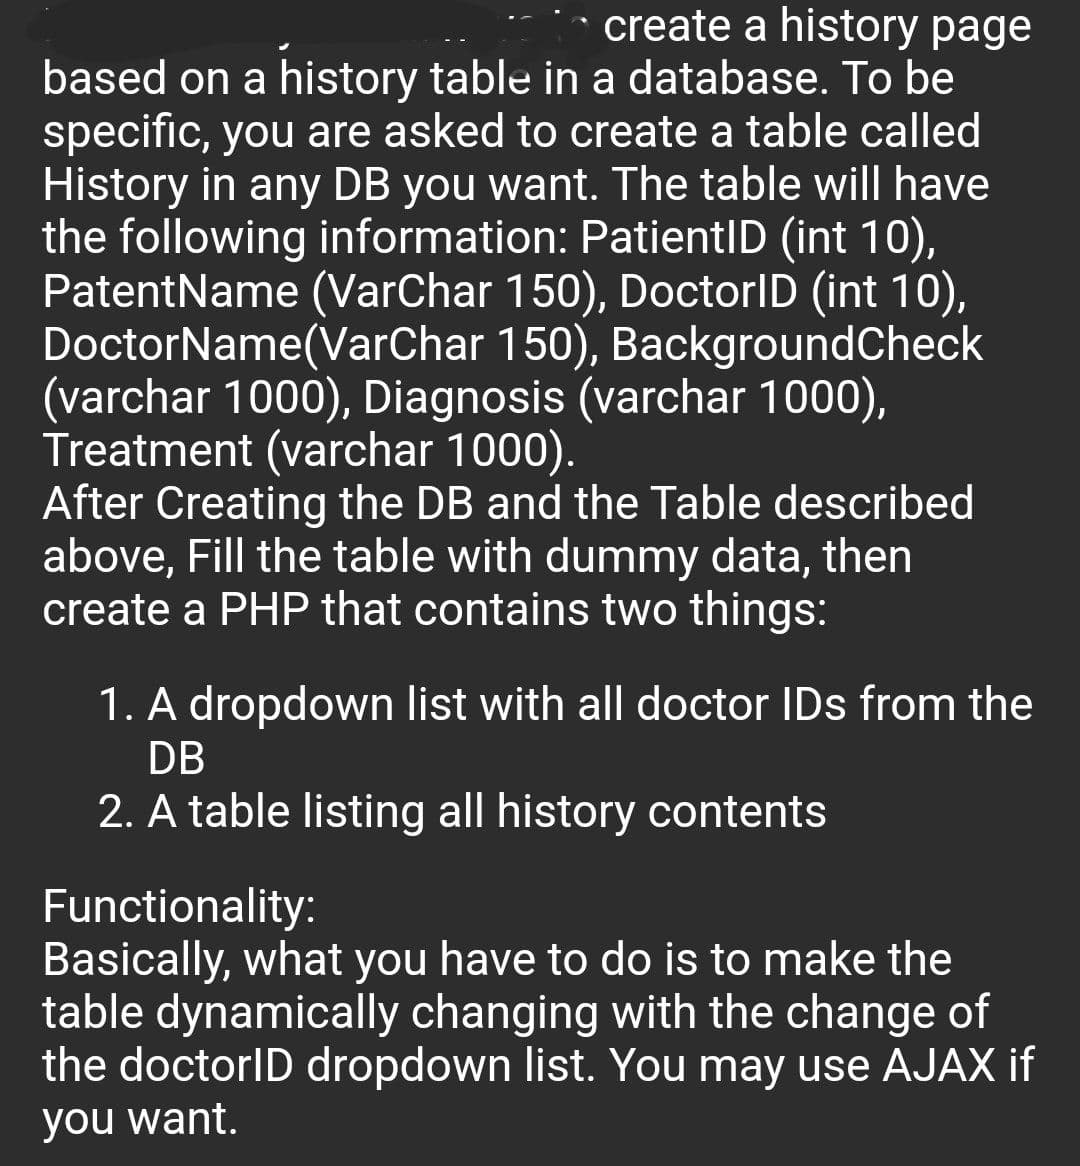 create a history page
based on a history table in a database. To be
specific, you are asked to create a table called
History in any DB you want. The table will have
the following information: PatientID (int 10),
PatentName (VarChar 150), DoctorID (int 10),
DoctorName(VarChar 150), BackgroundCheck
(varchar 1000), Diagnosis (varchar 1000),
Treatment (varchar 1000).
After Creating the DB and the Table described
above, Fill the table with dummy data, then
create a PHP that contains two things:
1. A dropdown list with all doctor IDs from the
DB
2. A table listing all history contents
Functionality:
Basically, what you have to do is to make the
table dynamically changing with the change of
the doctorID dropdown list. You may use AJAX if
you want.